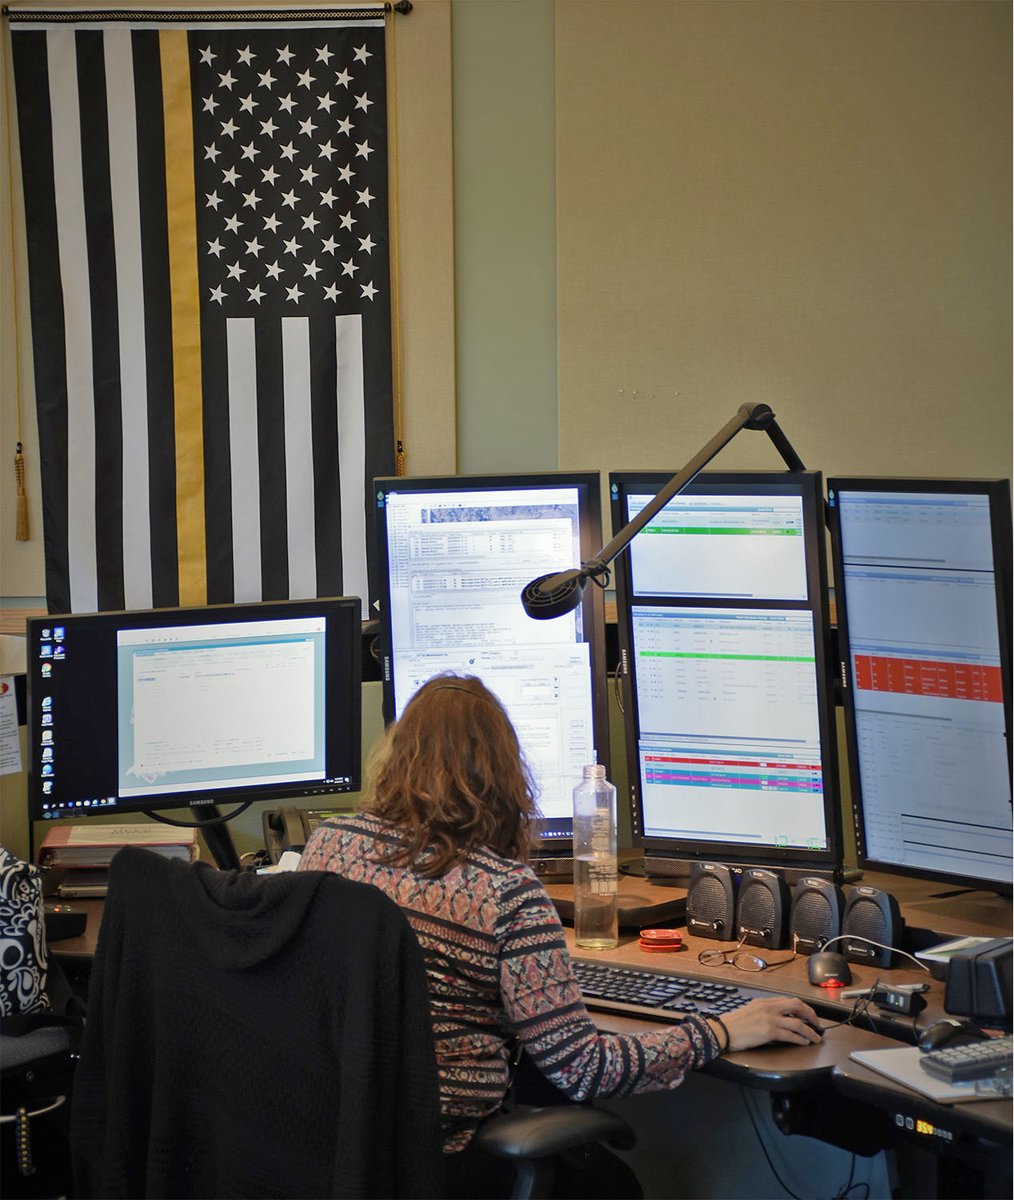 Happy National Public Safety Telecommunicators Week To all the Emergency Communications Specialists that work at St. Louis County Communications Center...THANK YOU for your dedication. These individuals answer the call of those in crisis in a calm, caring, and respectful manner.